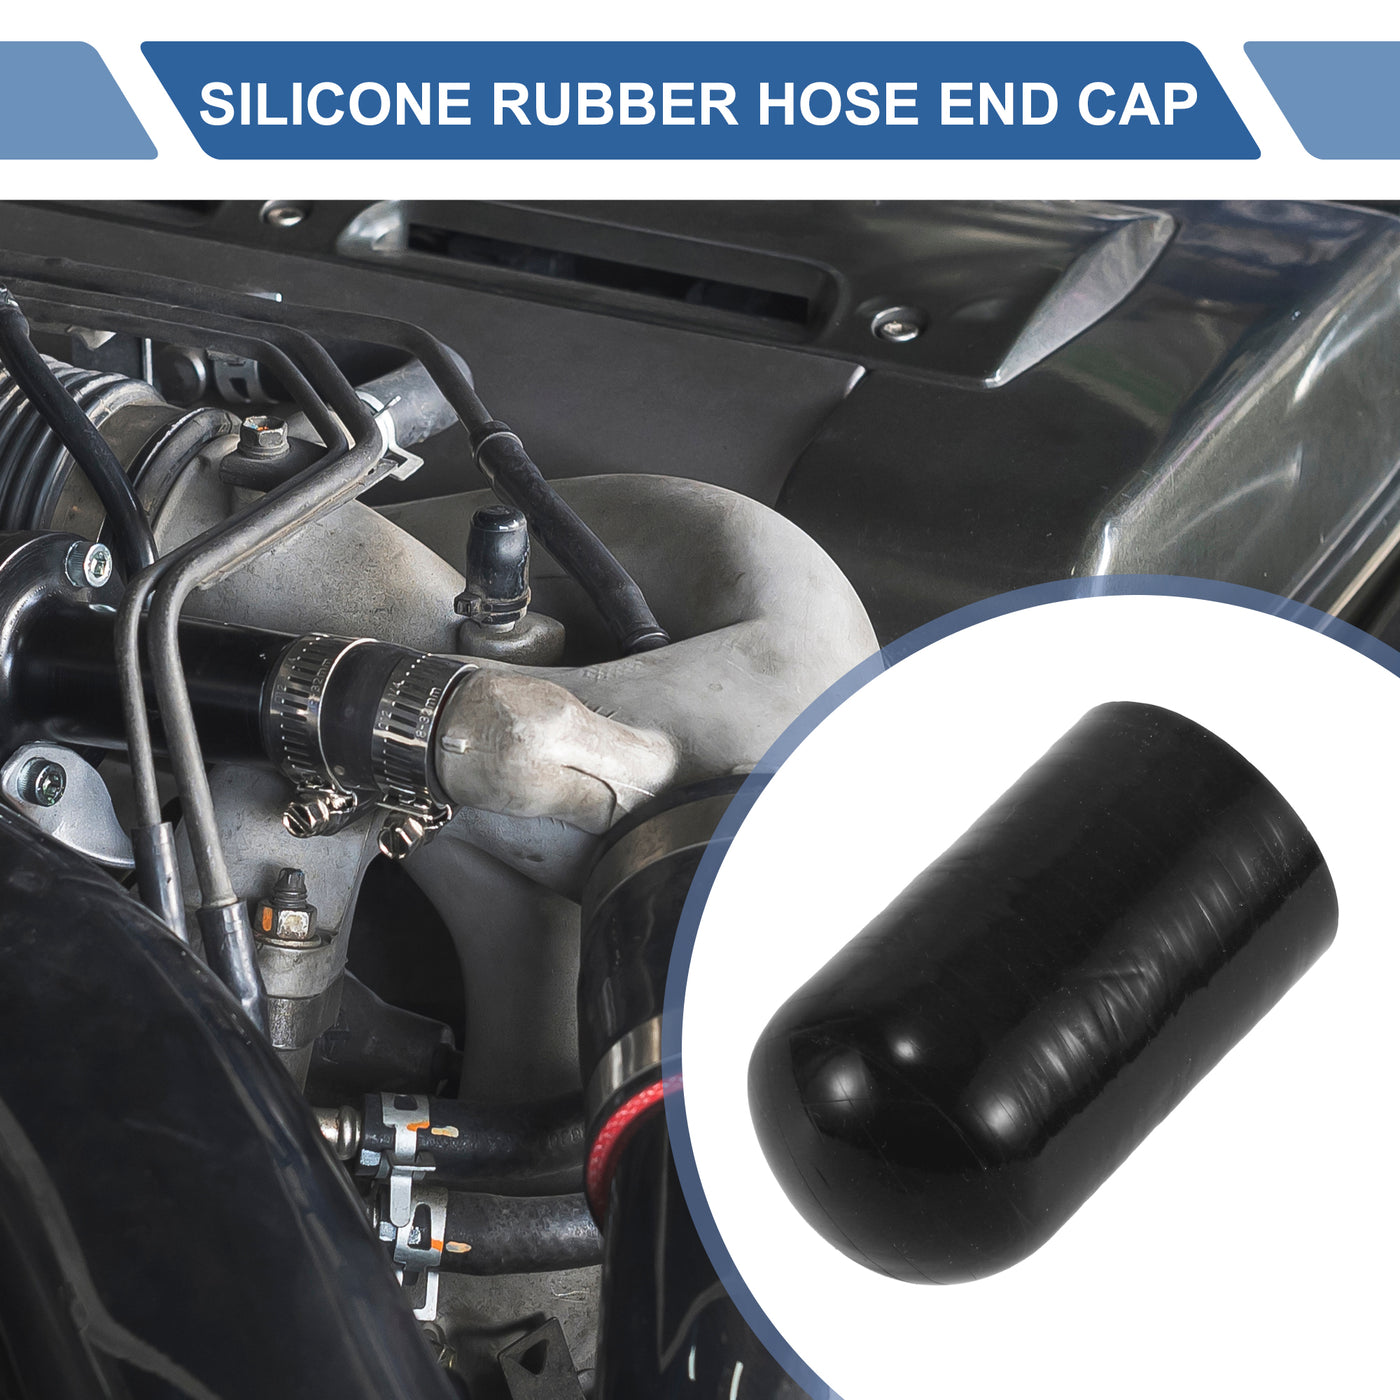 X AUTOHAUX 1 Pcs 60mm Length 35mm/1.38" ID Black Car Silicone Rubber Hose End Cap with Clamp Silicone Reinforced Blanking Cap for Bypass Tube Universal